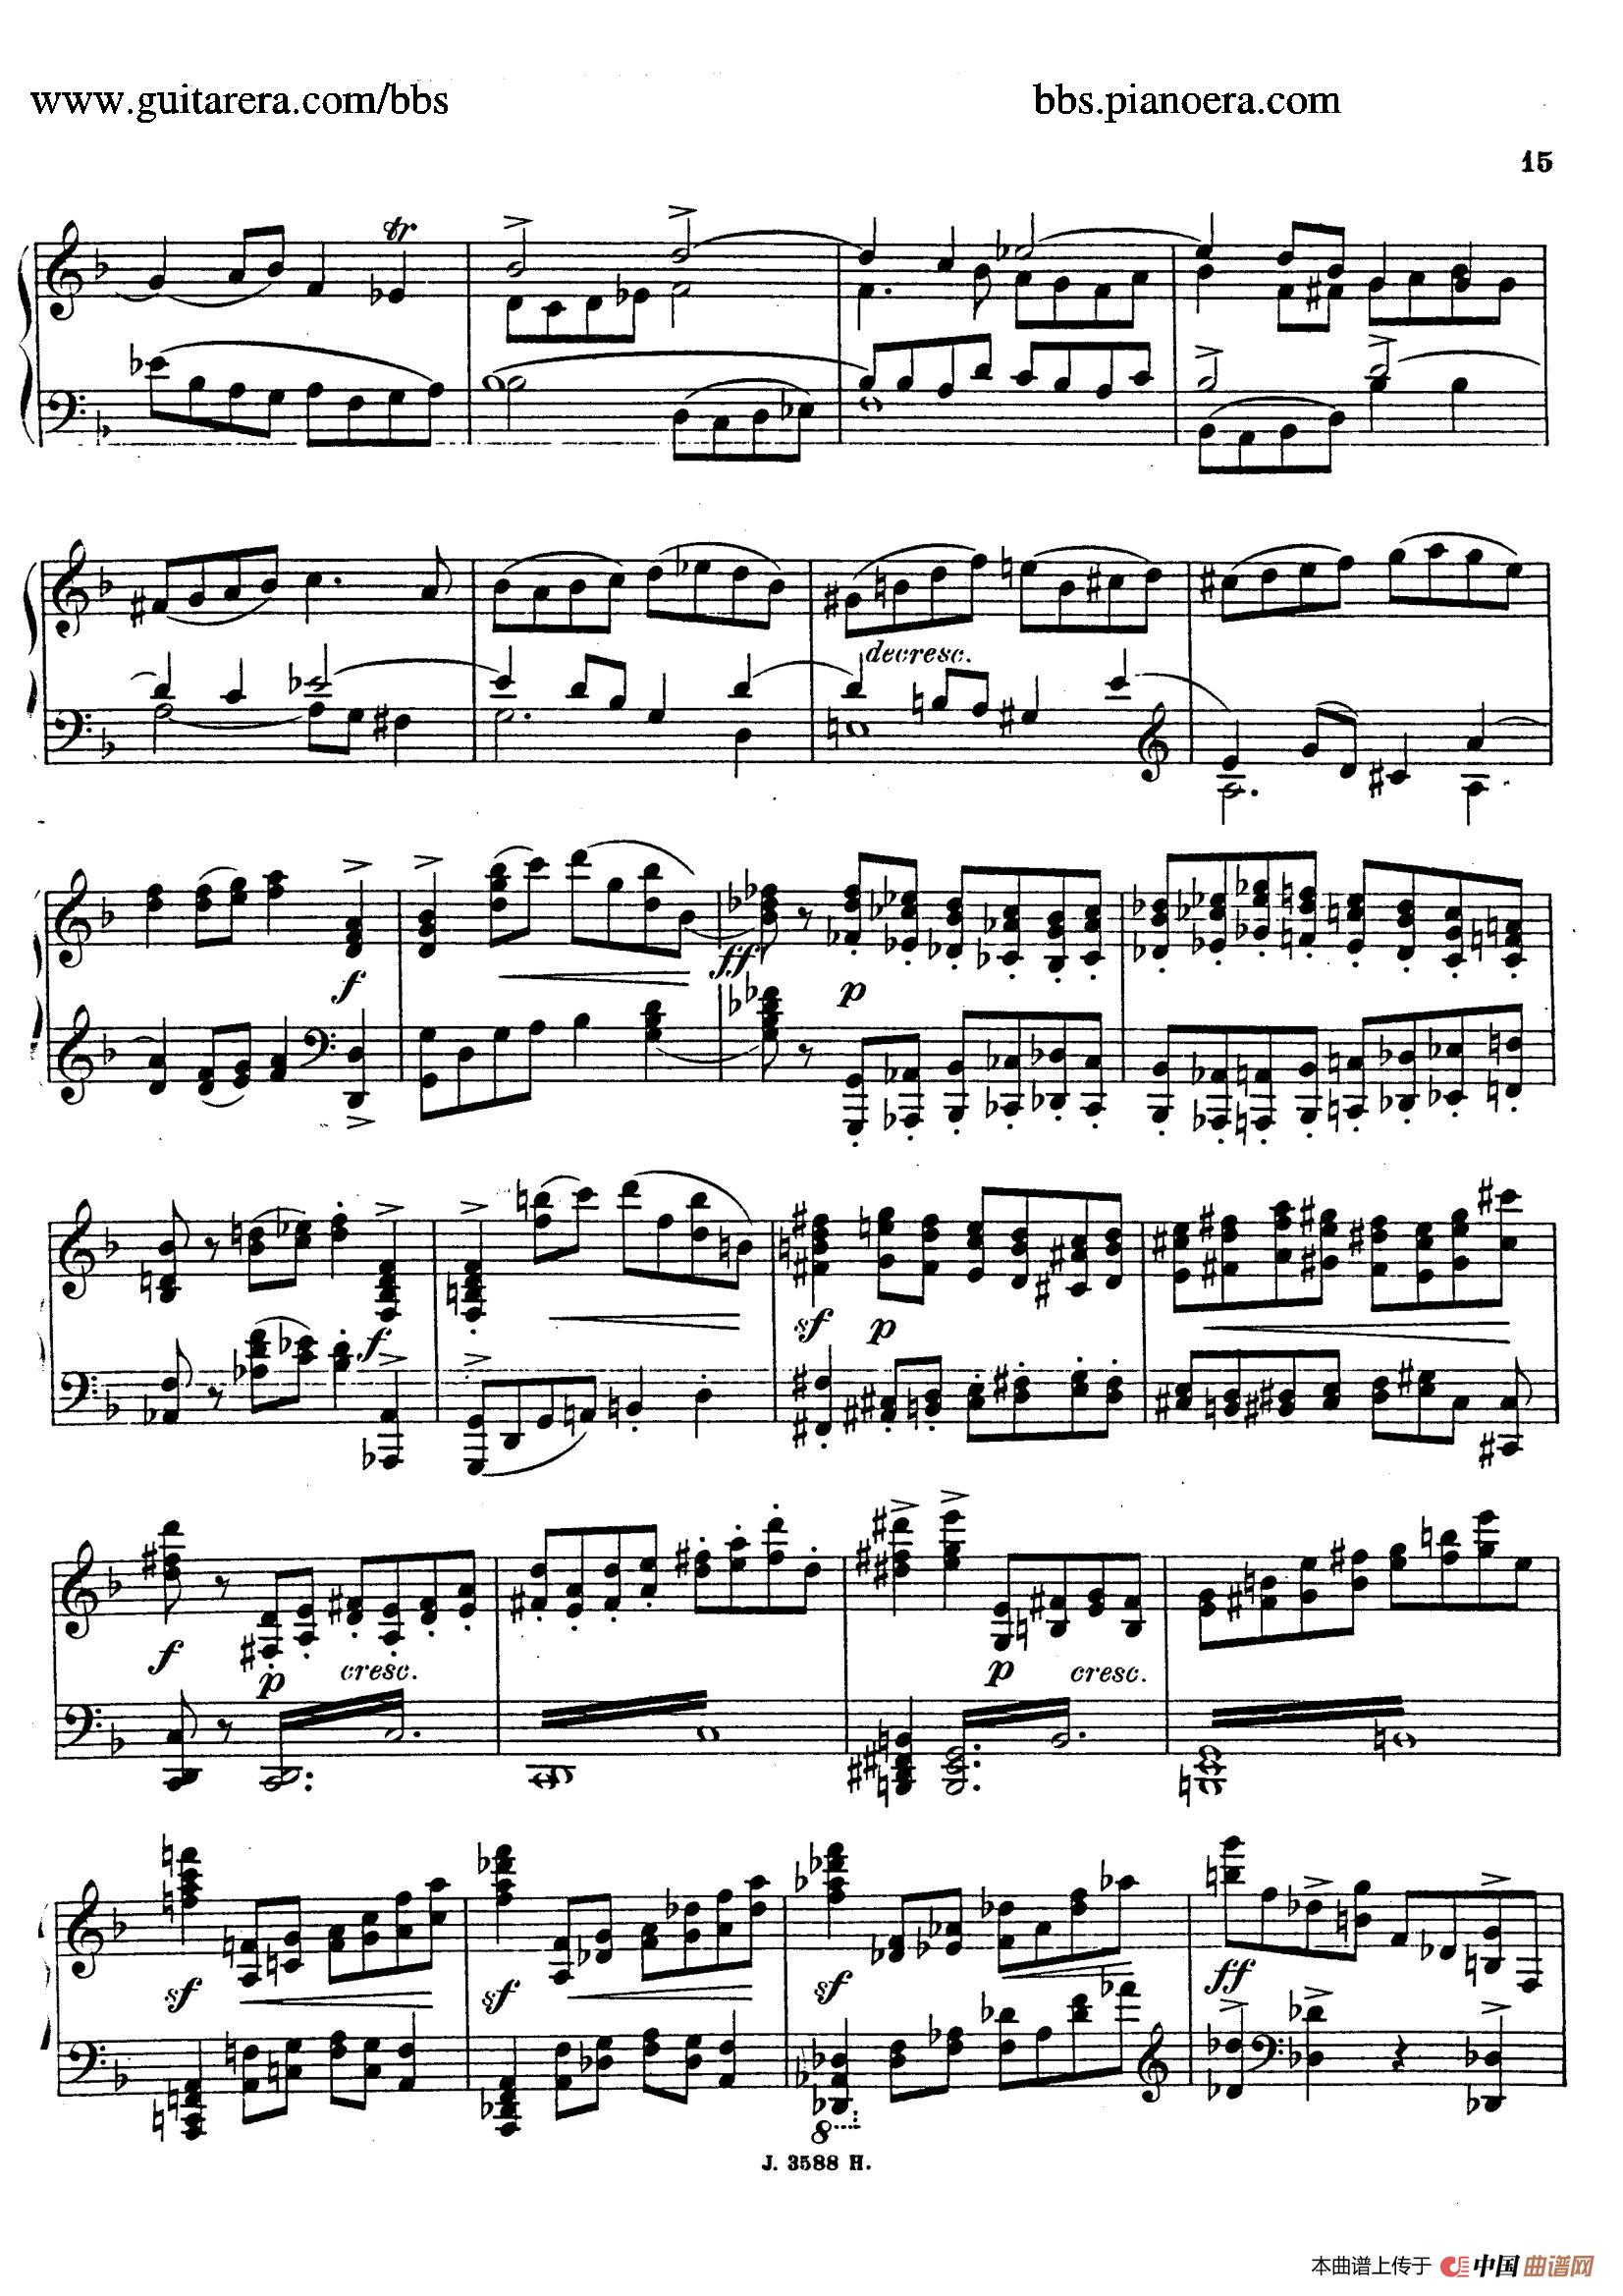 《Theme with Variations and Fugue in F Major Op.14 》钢琴曲谱图分享